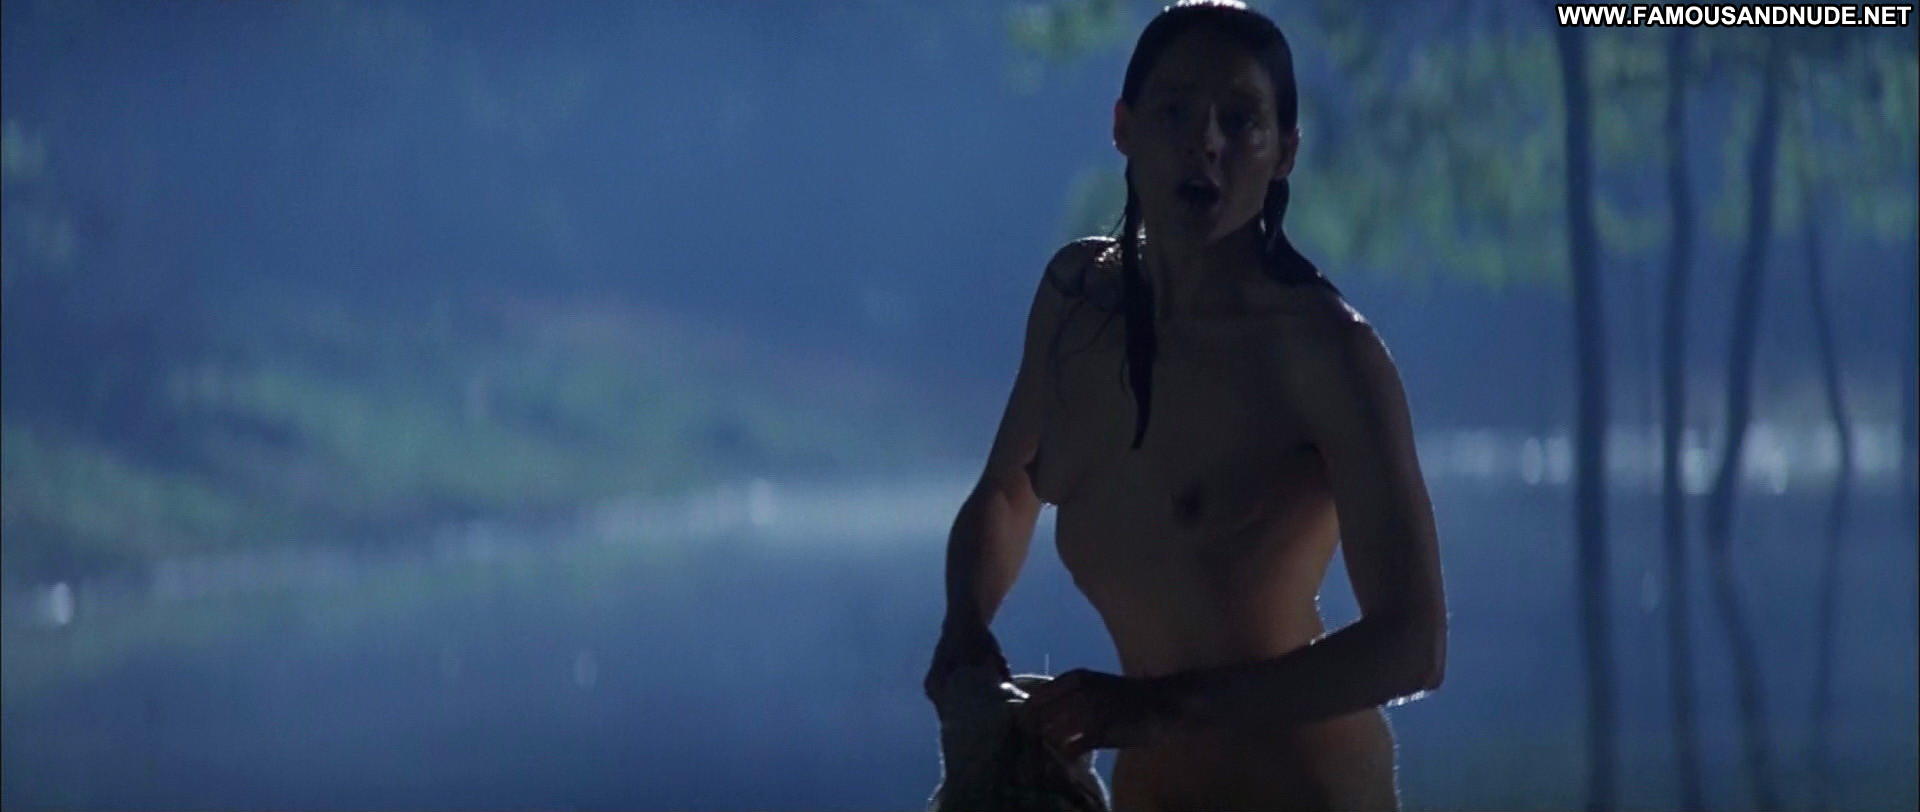 Nell Jodie Foster Movie Posing Hot Beautiful Babe Topless Celebrity Hd.